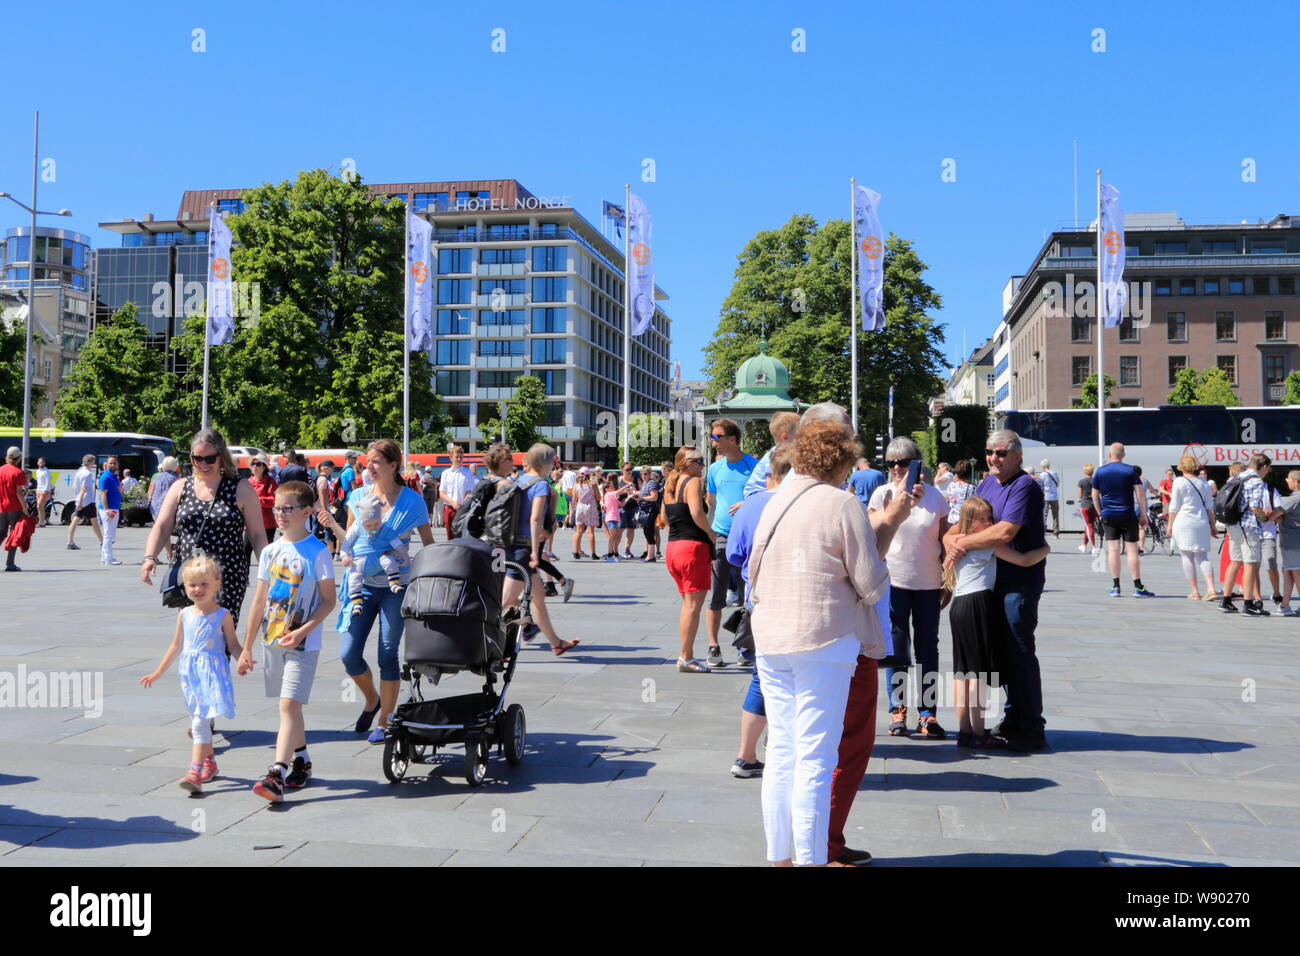 People crowd the public square, Festplassen, in Bergen, Norway, during the summer. Hotel Norge is seen in the background. Stock Photo